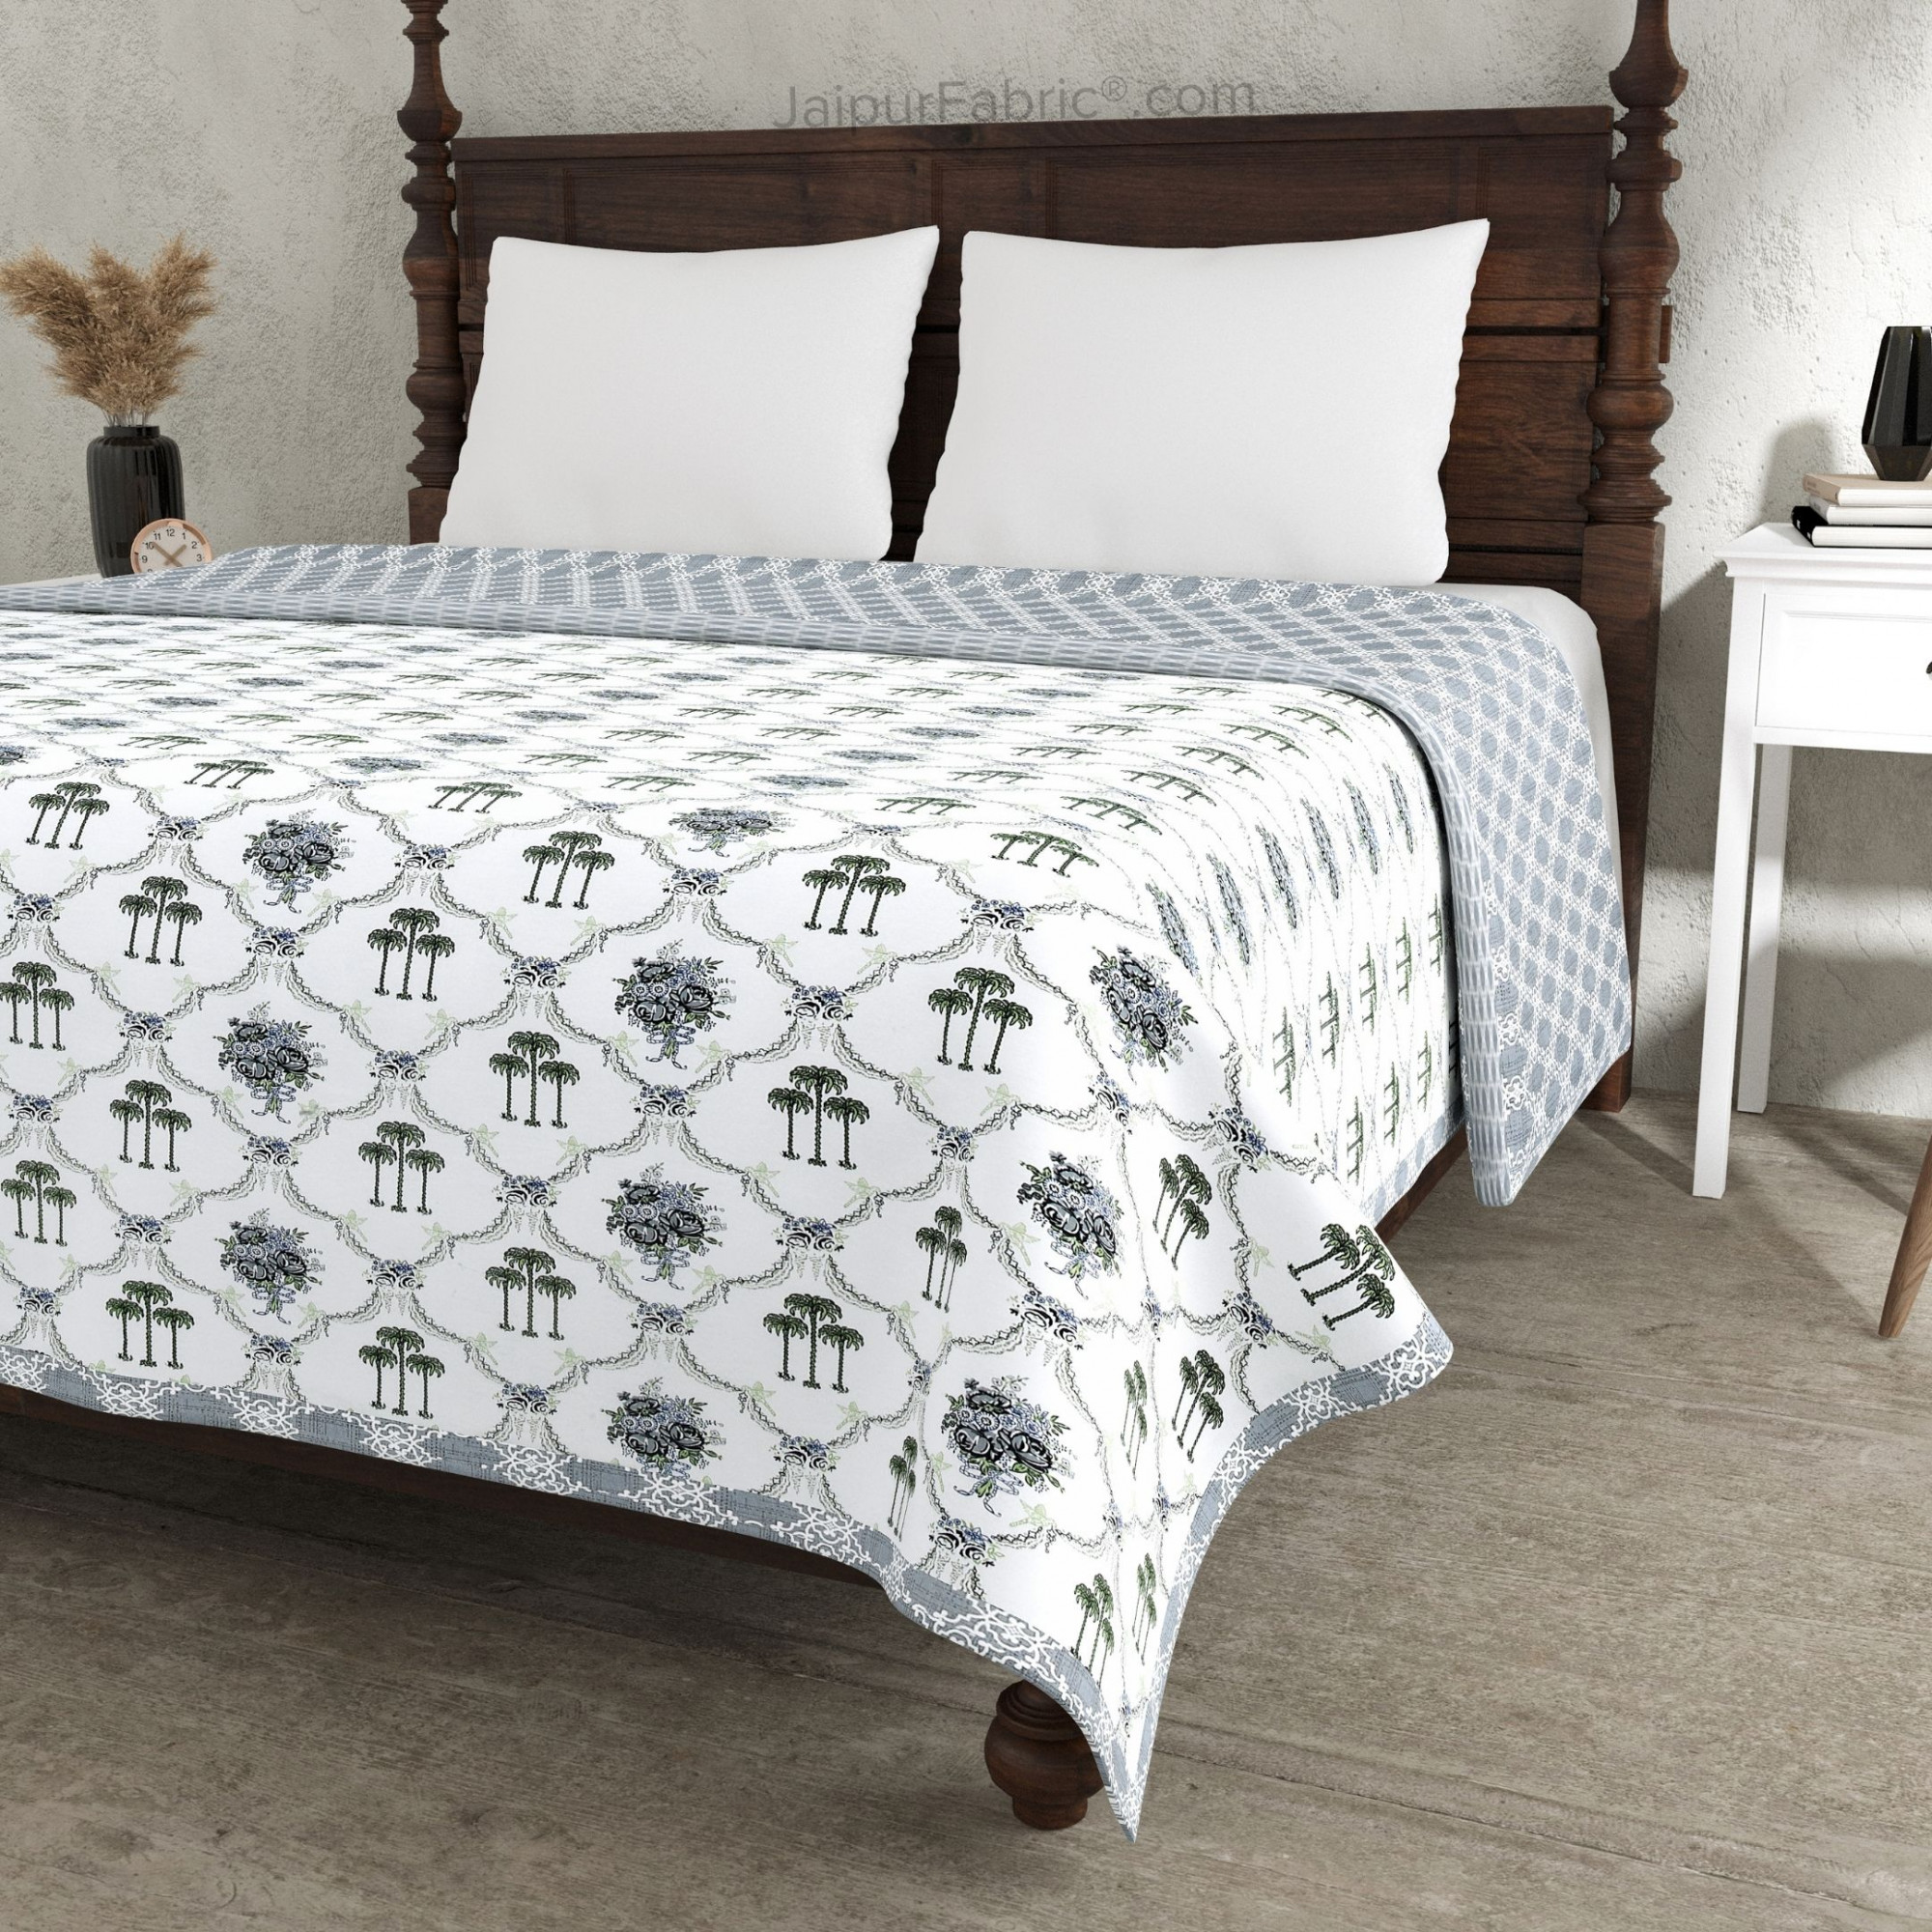 Misty Marble Grey & White Cotton Reversible Double Bed Dohar